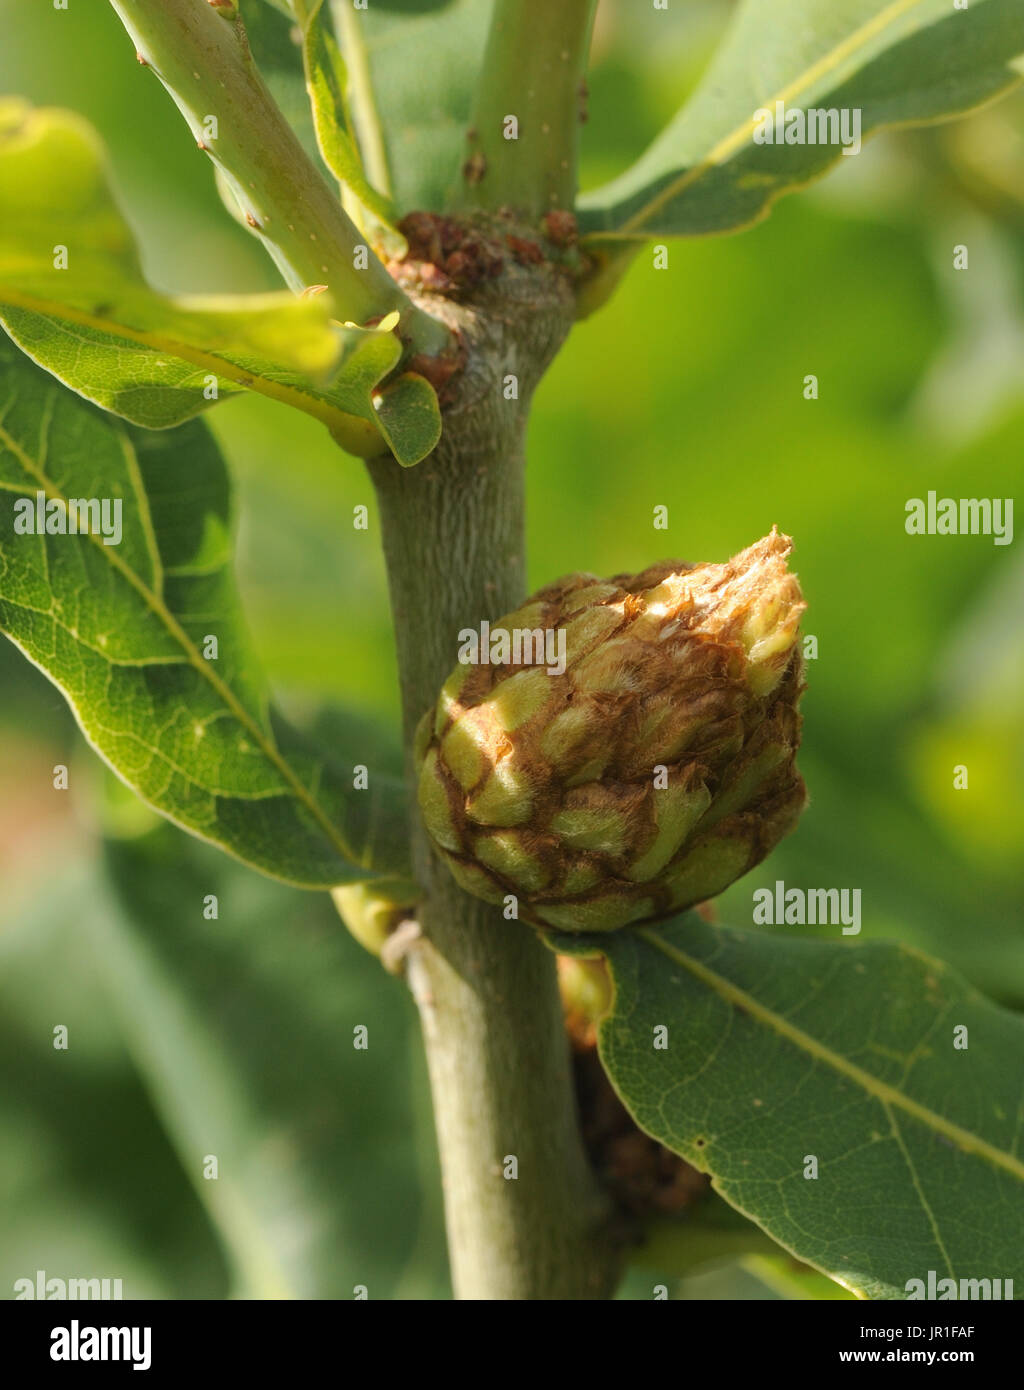 Oak  artichoke gall on the stem of  Pedunculate or Common Oak (Quercus robur). The galls are caused by the lava of the Oak Artichoke Gall Wasp Stock Photo